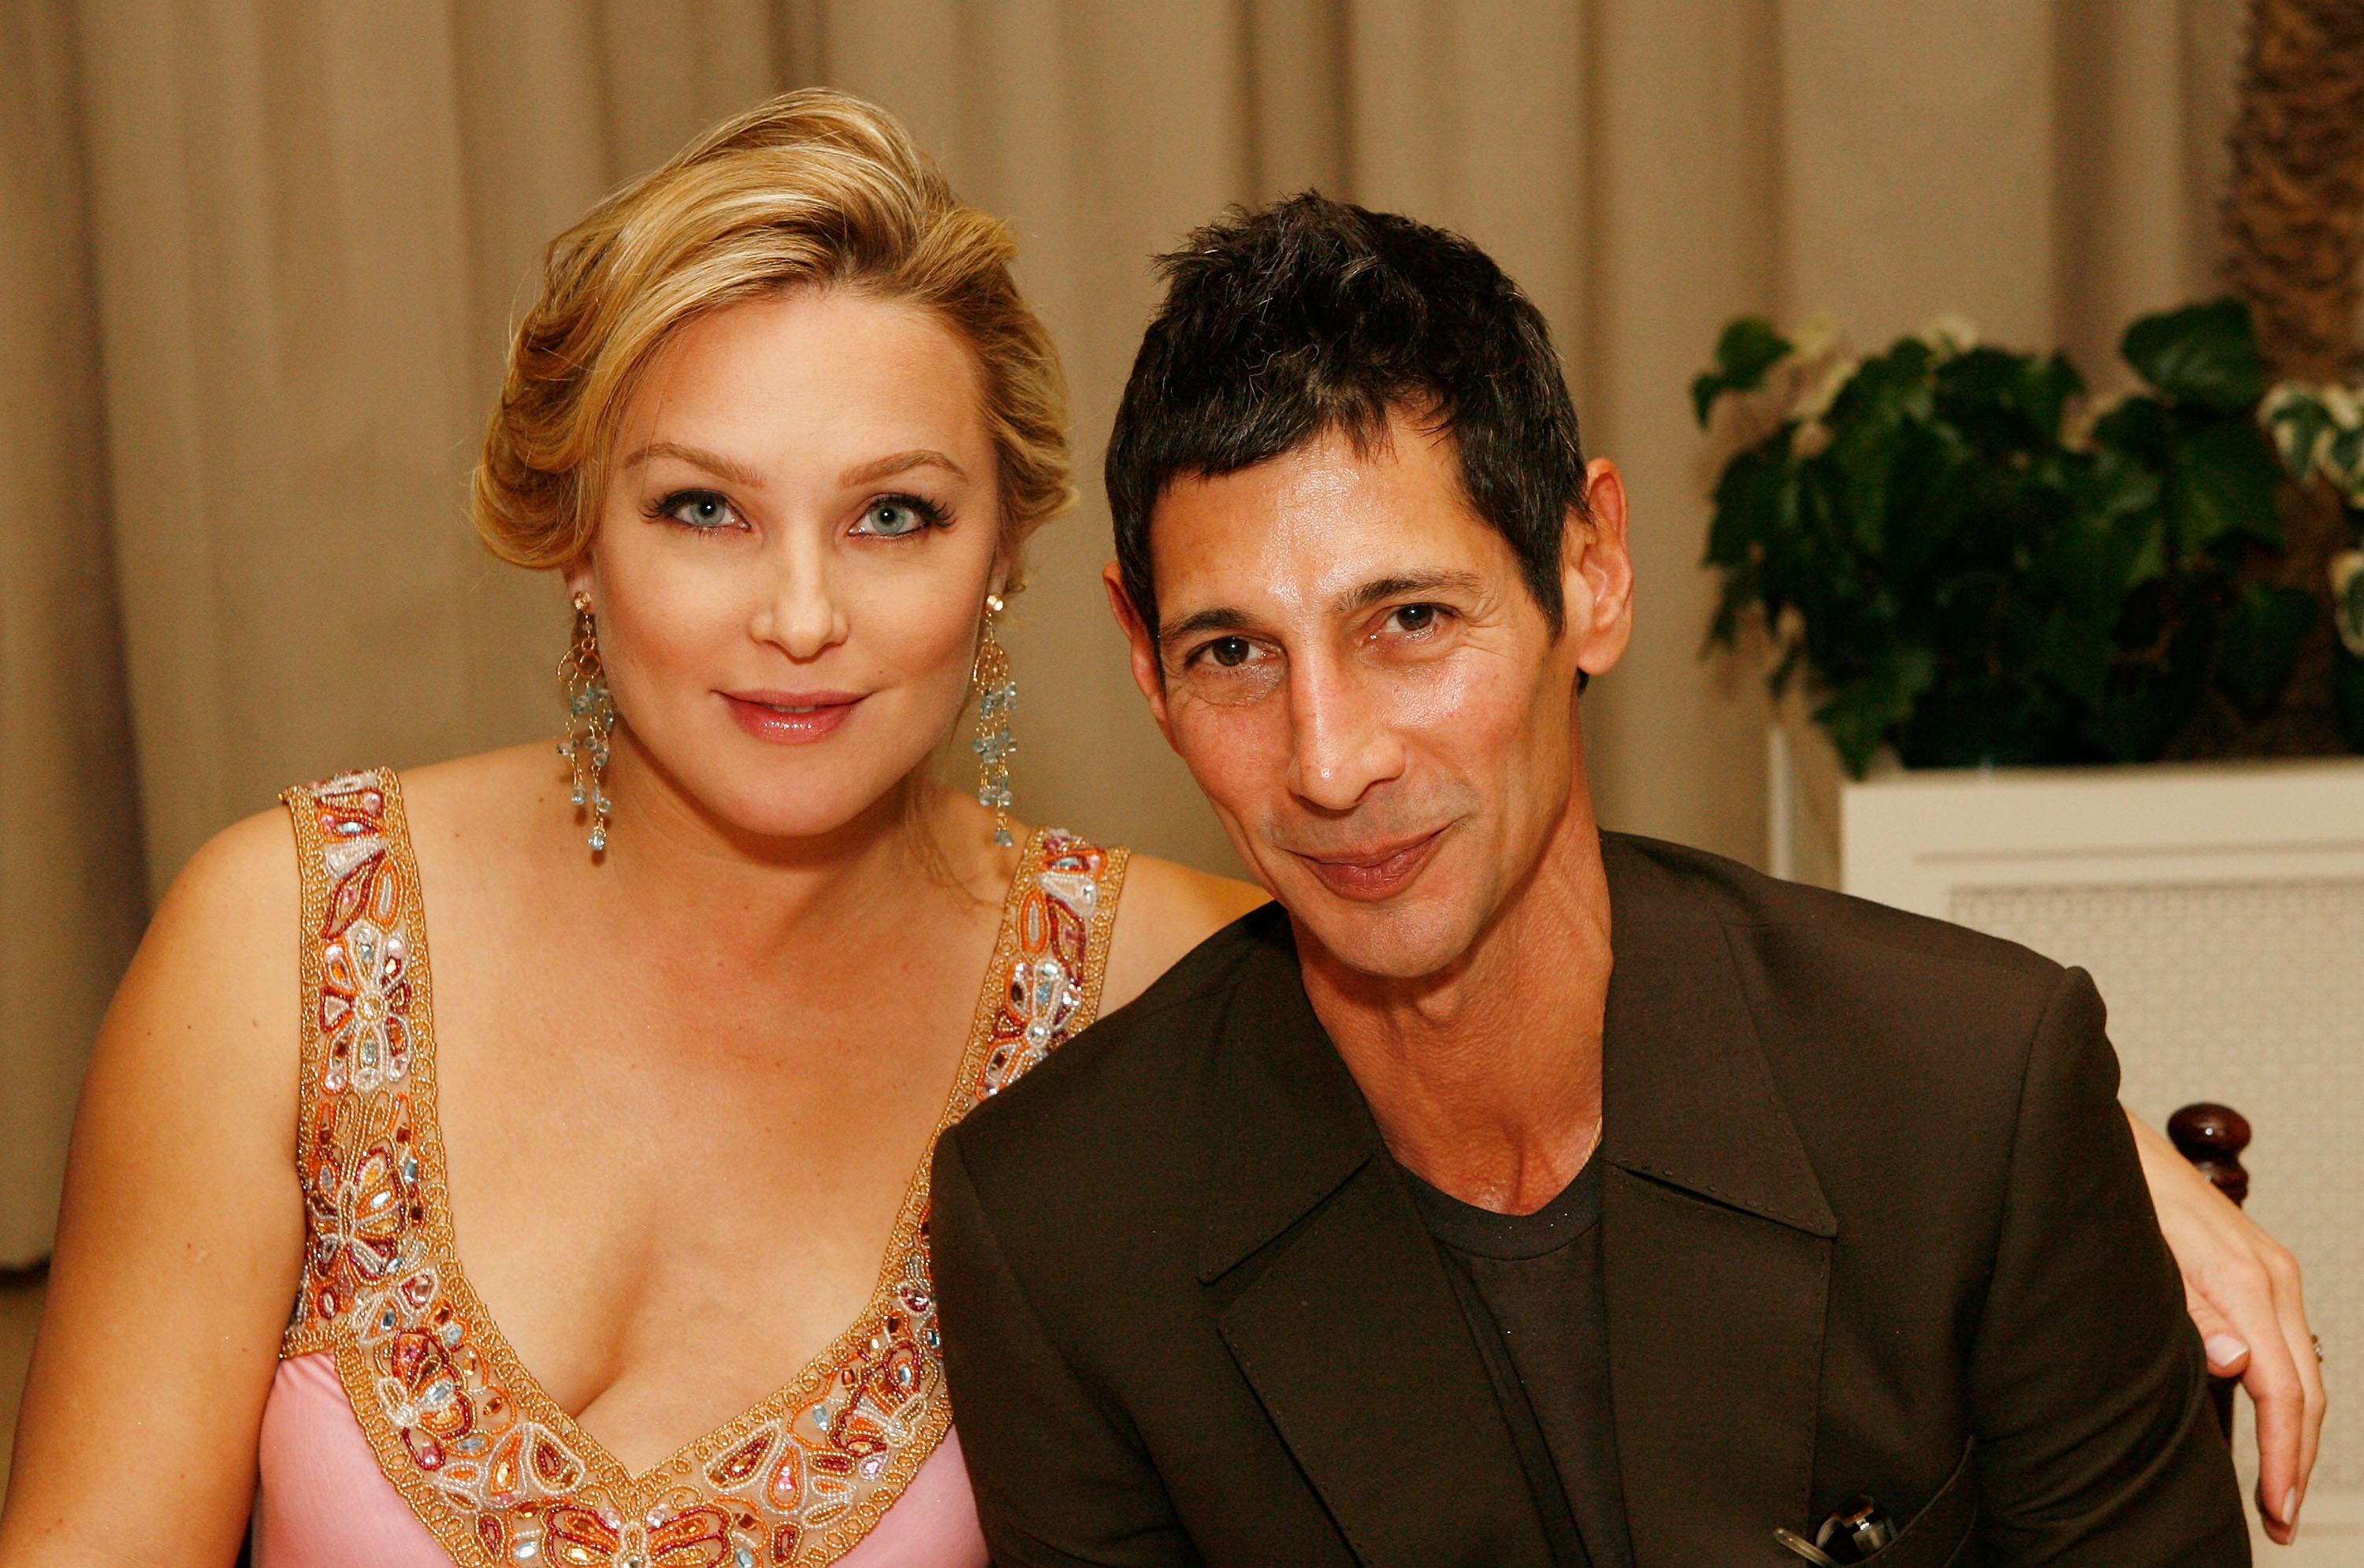 Actress Elisabeth Rohm (L-R) and Ron Wooster attend the John Varvatos launches is first fragrance for women at a private dinner on February 11, 2008 West Hollywood California. | Source: Getty Images